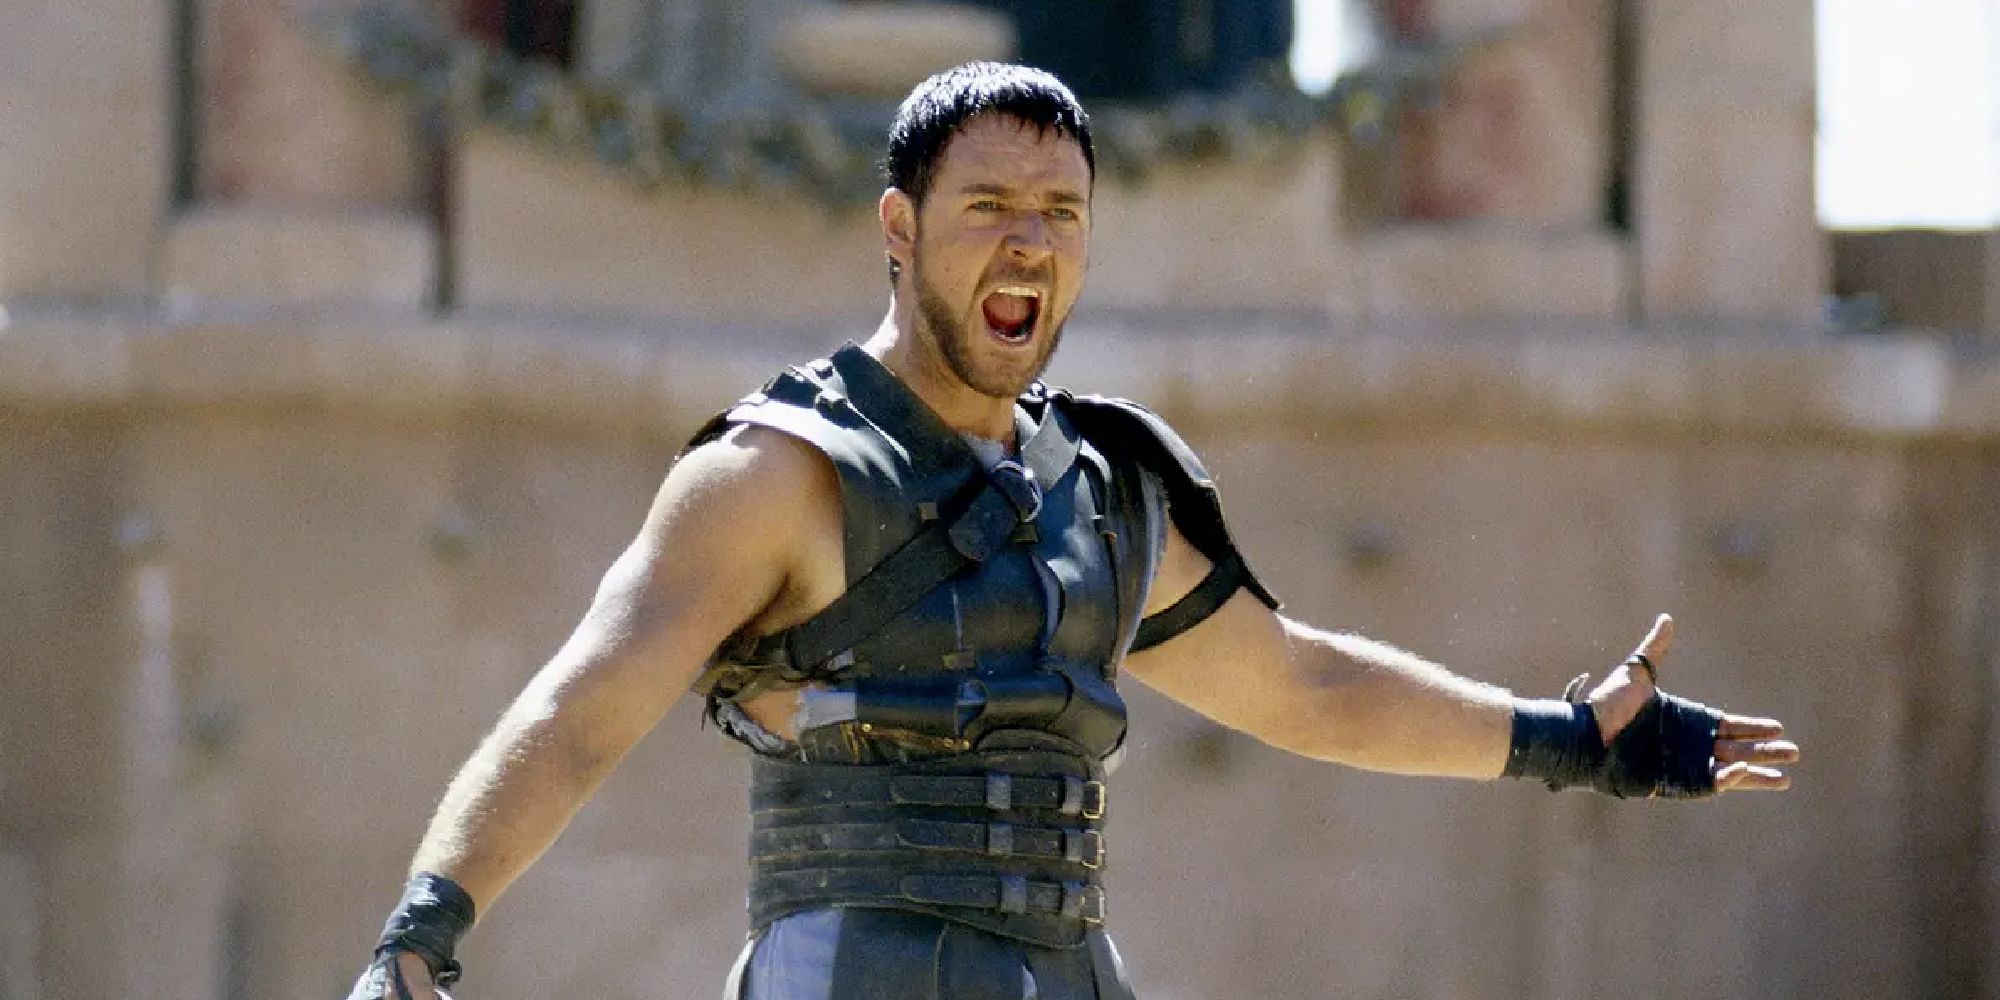 Maximus screaming with his arms spread in Gladiator